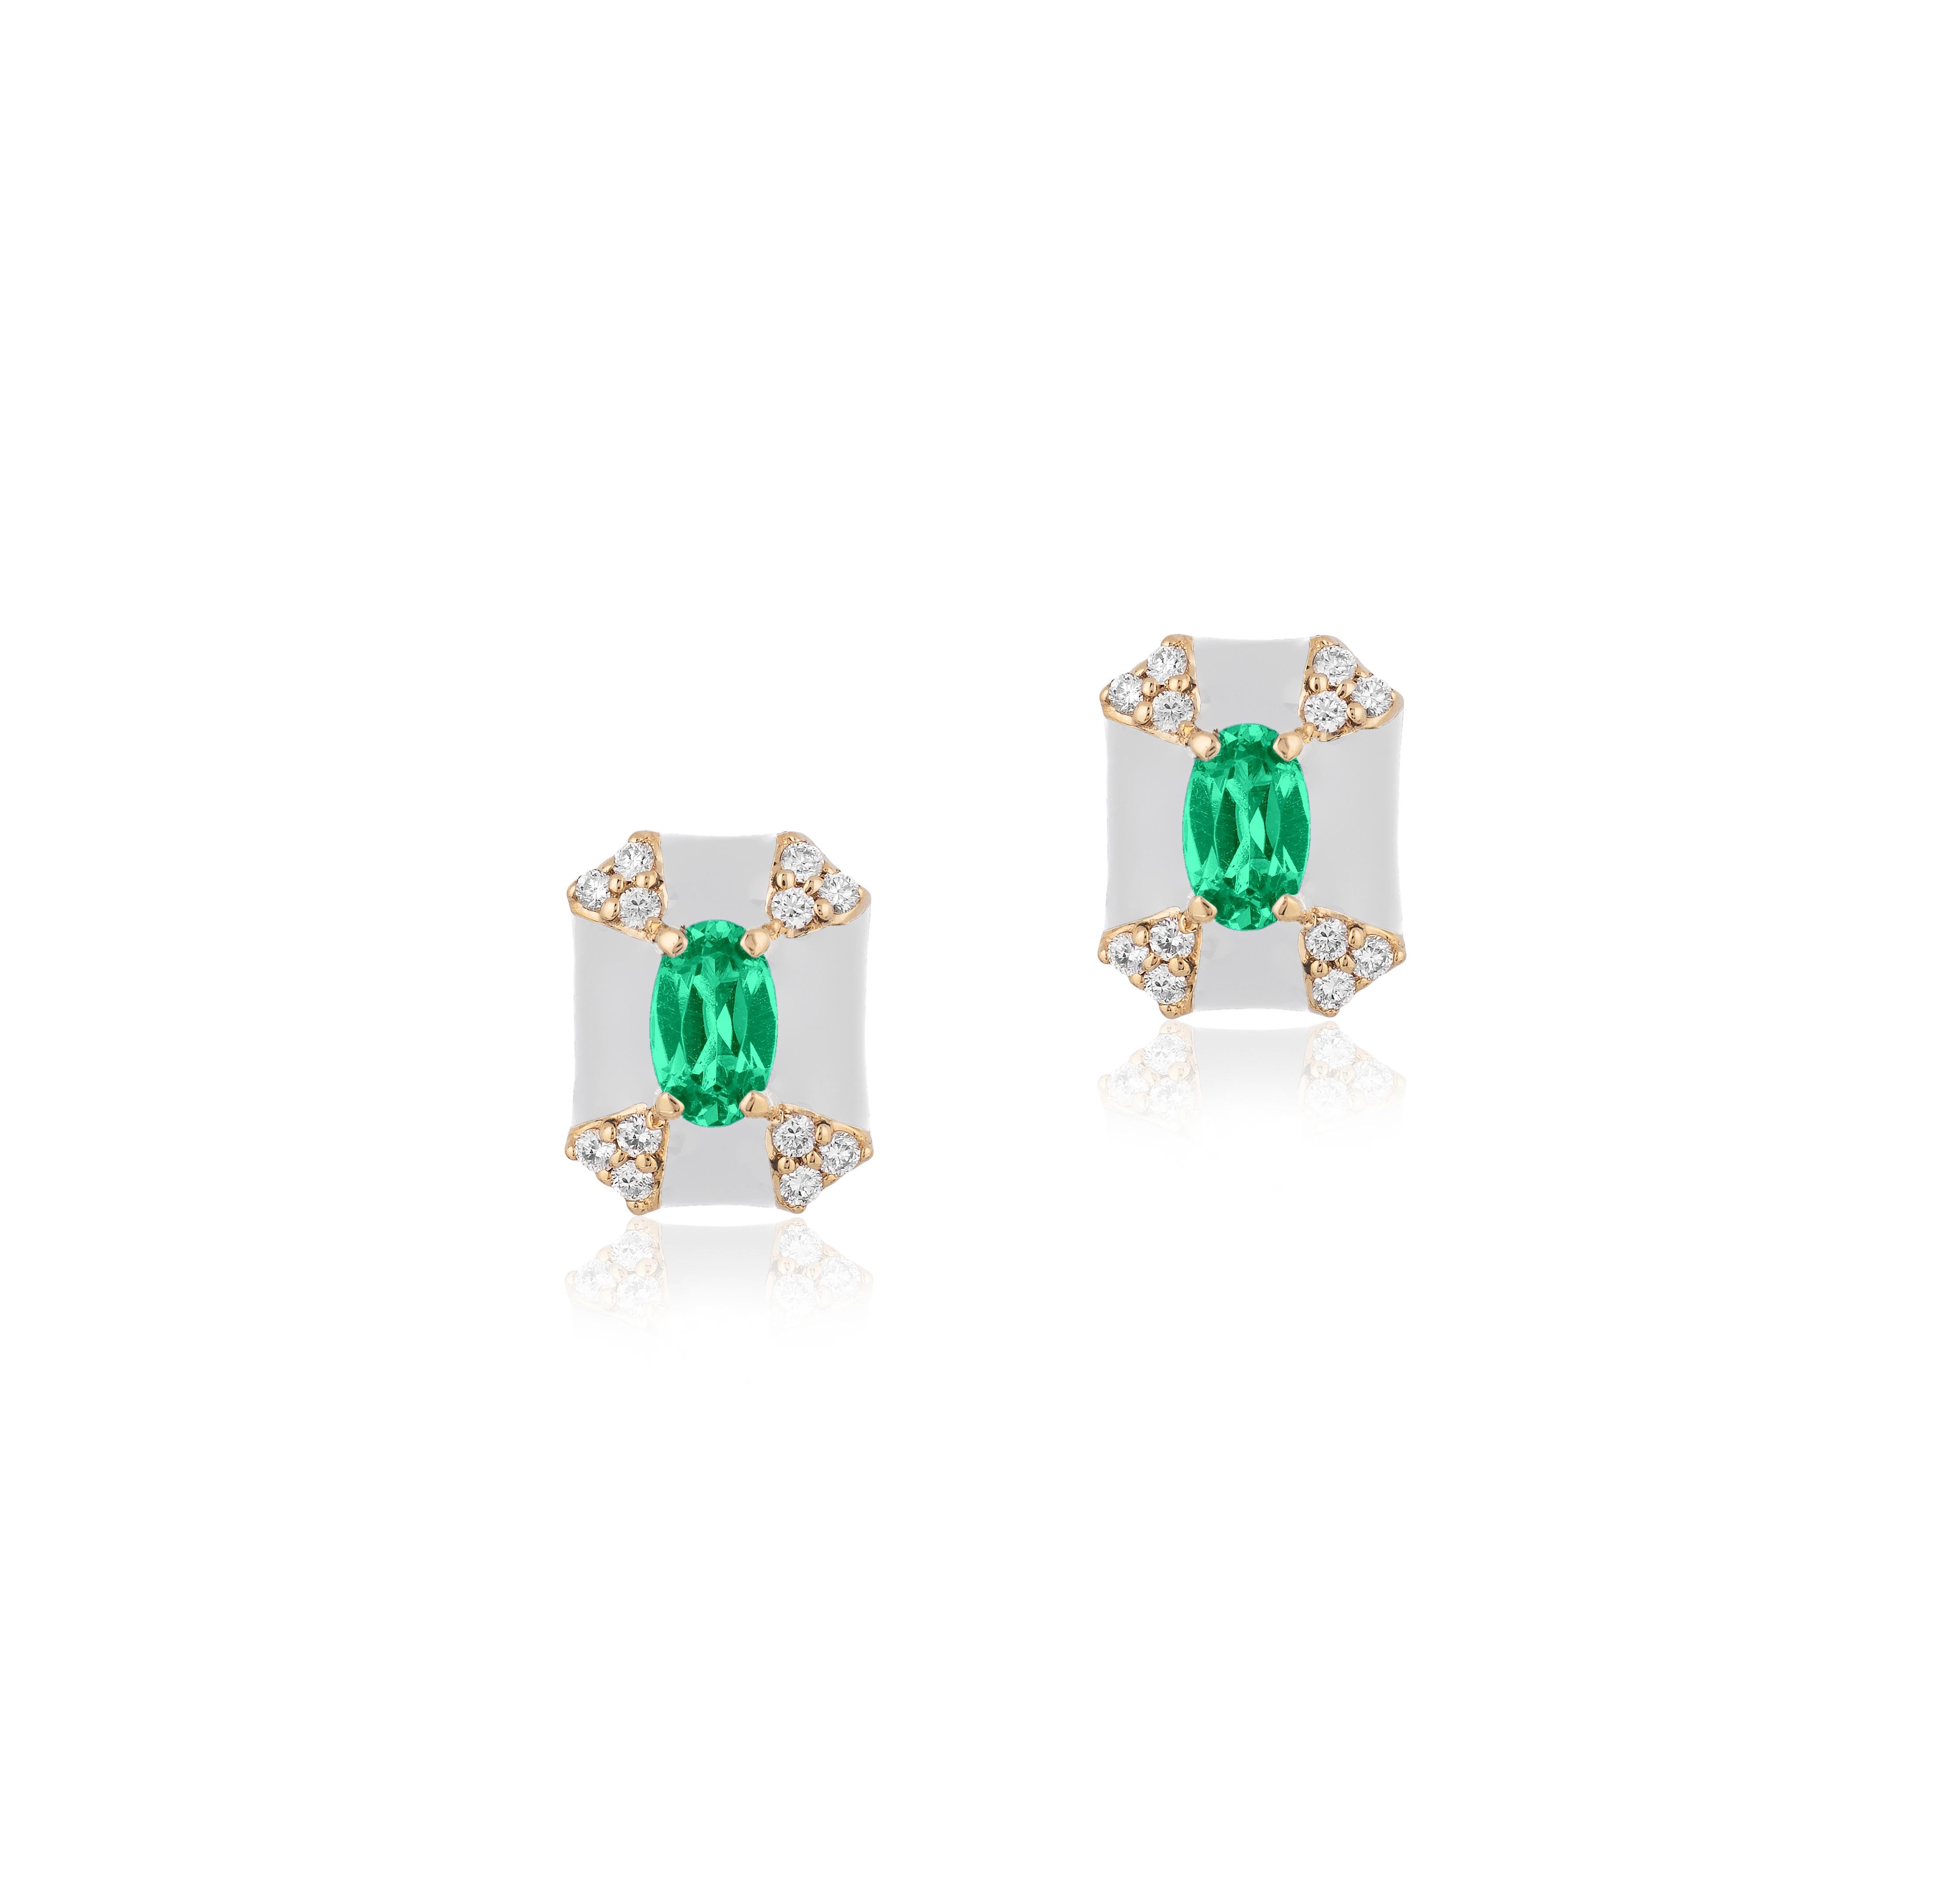 Octagon Cut Goshwara Octagon White Enamel with Emerald and Diamonds Stud Earrings For Sale